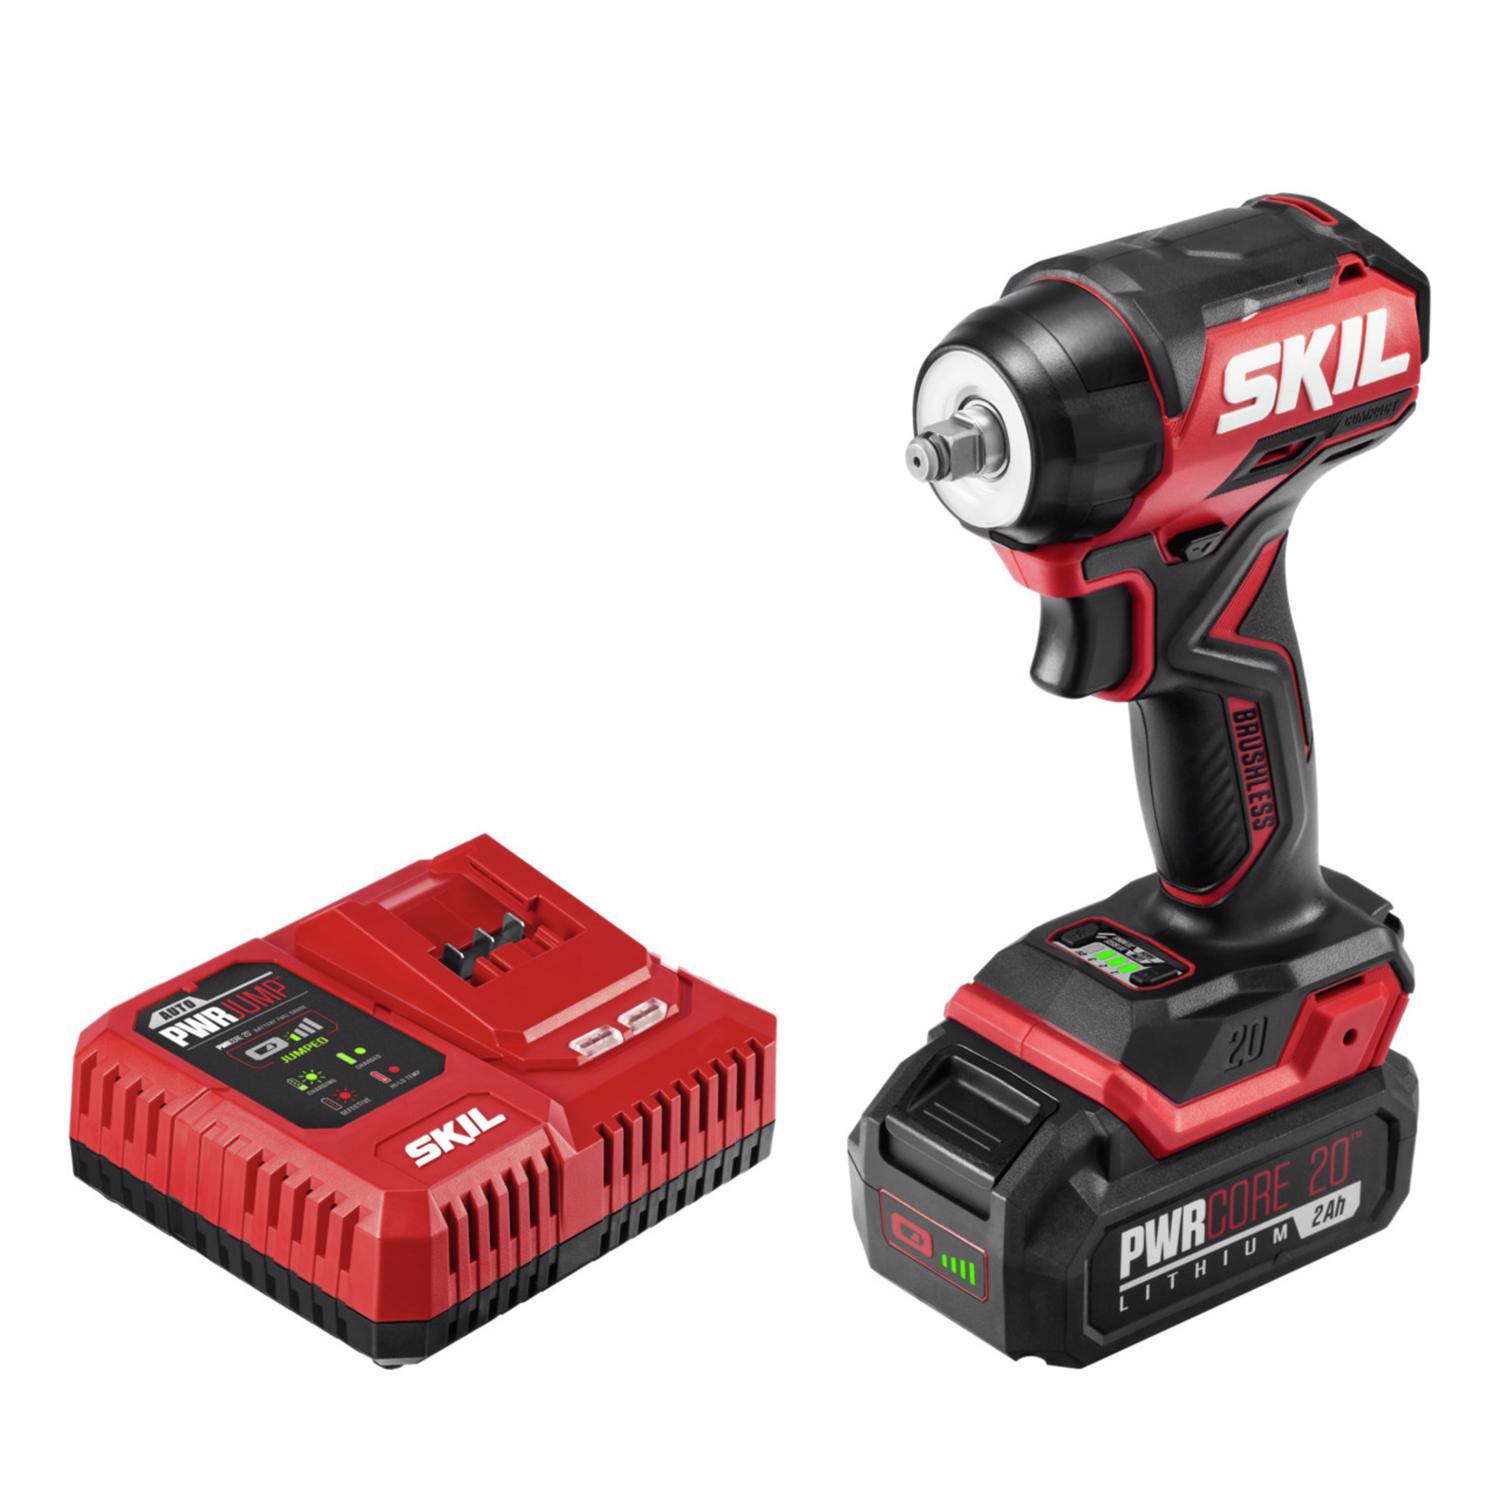 Photos - Drill / Screwdriver Skil 20V PWR CORE 20 3/8 in. Cordless Brushless Compact Impact Wrench Kit 